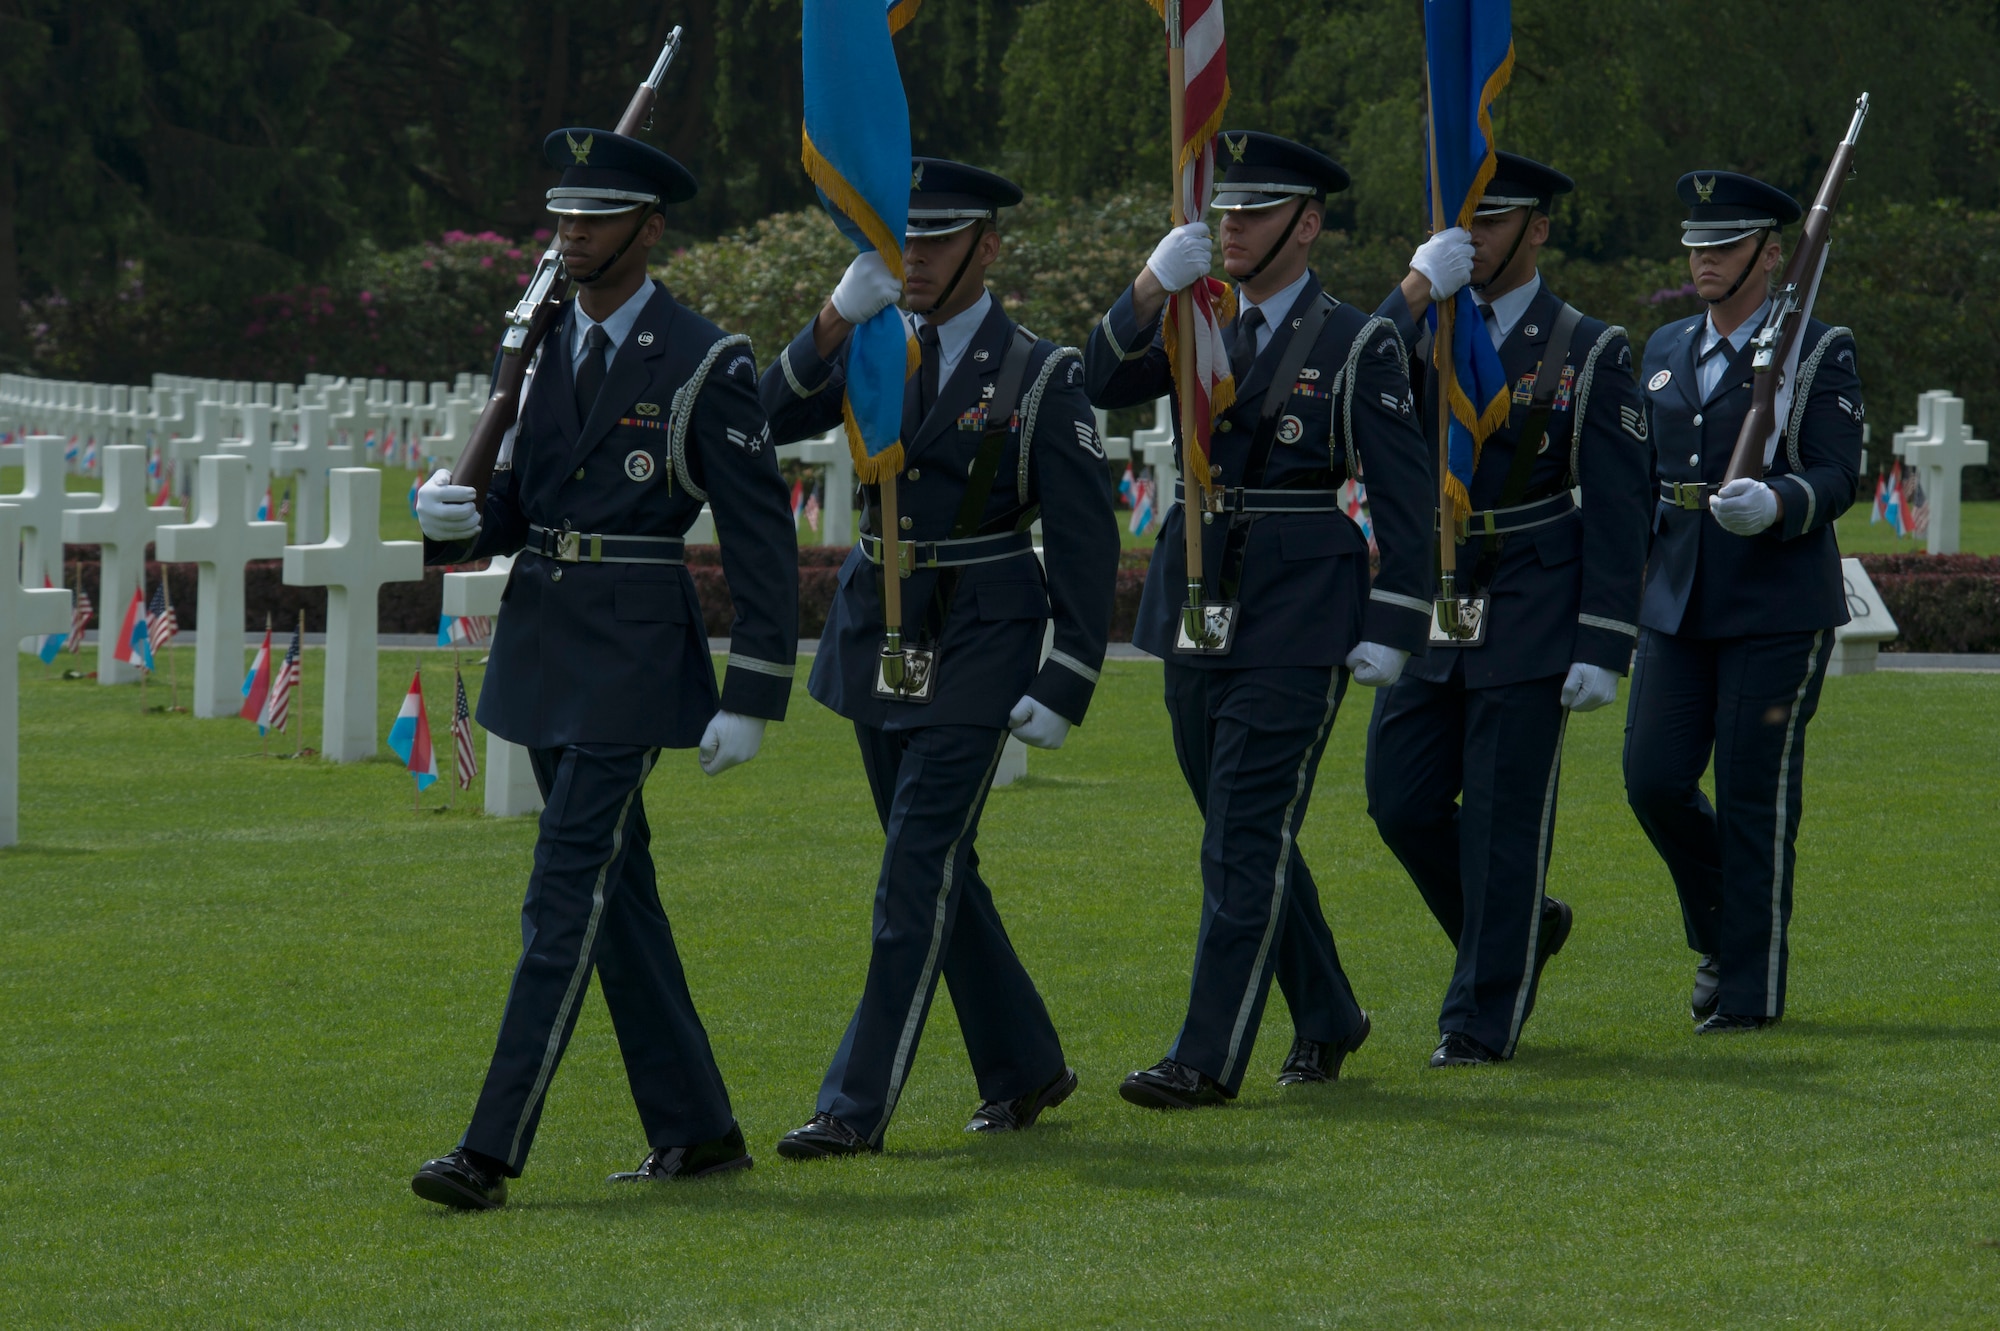 U.S. Air Force ceremonial guardsmen from Spangdahlem Air Base, Germany, carry the colors at the beginning of a Memorial Day ceremony at the Luxembourg American Cemetery and Memorial in Luxembourg, May 28, 2016. Memorial Day is observed on the last Monday of May in remembrance of those who gave the ultimate sacrifice. (U.S. Air Force photo by Staff Sgt. Joe W. McFadden/Released)  